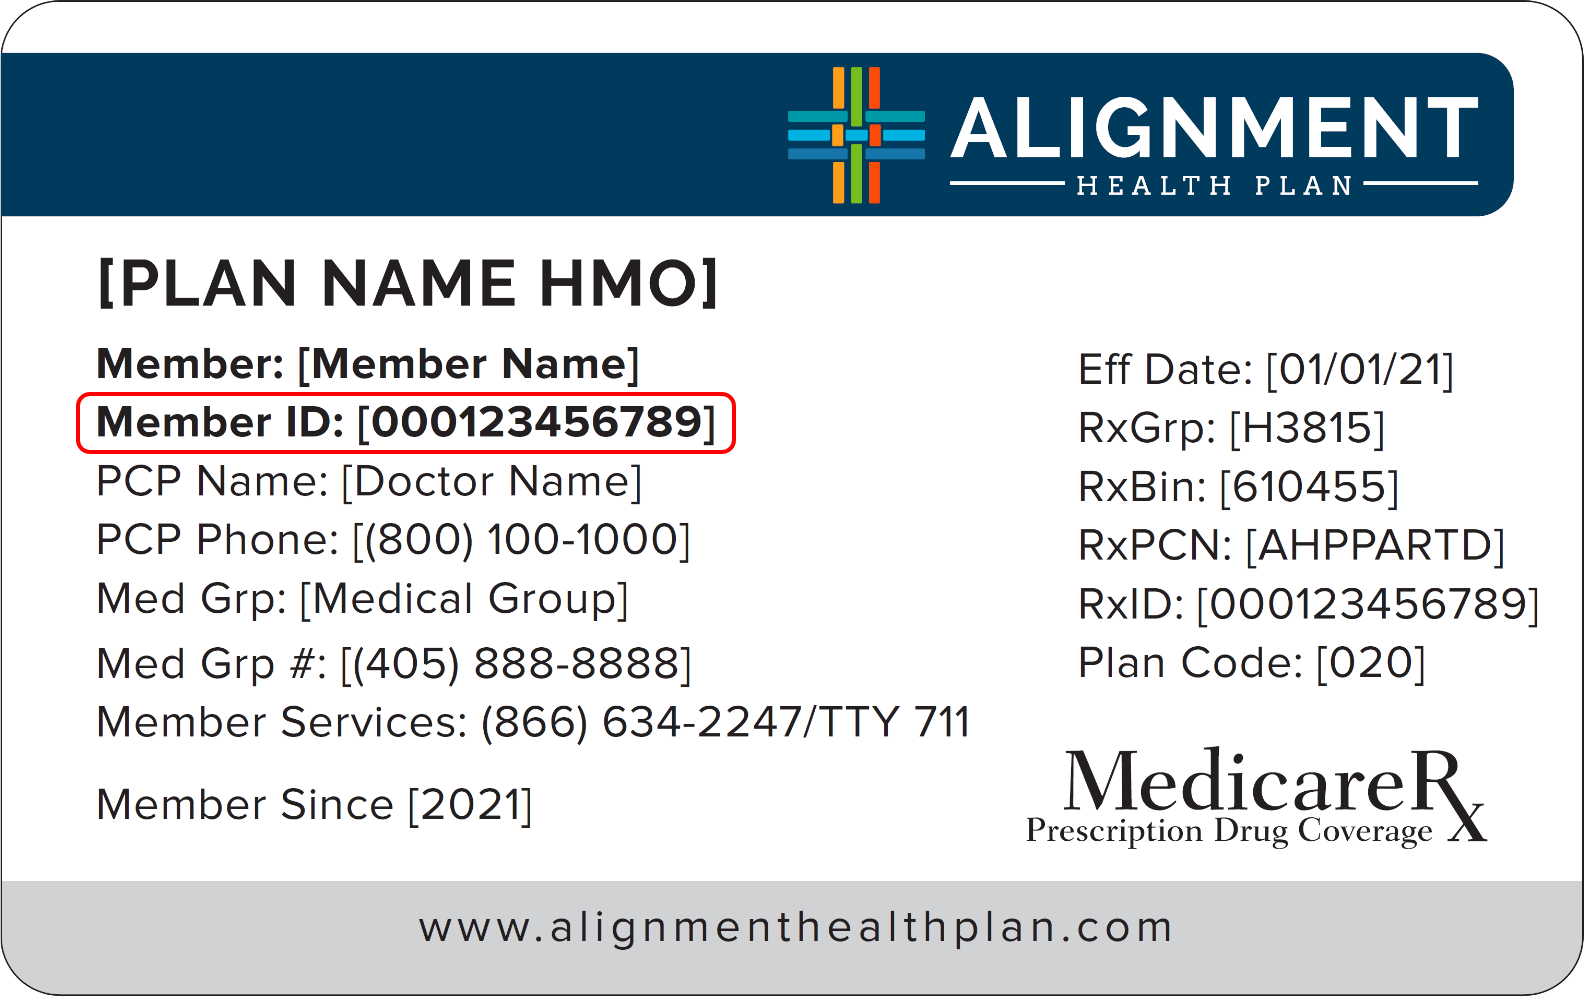 Alignment Health Plan HMO ID Number